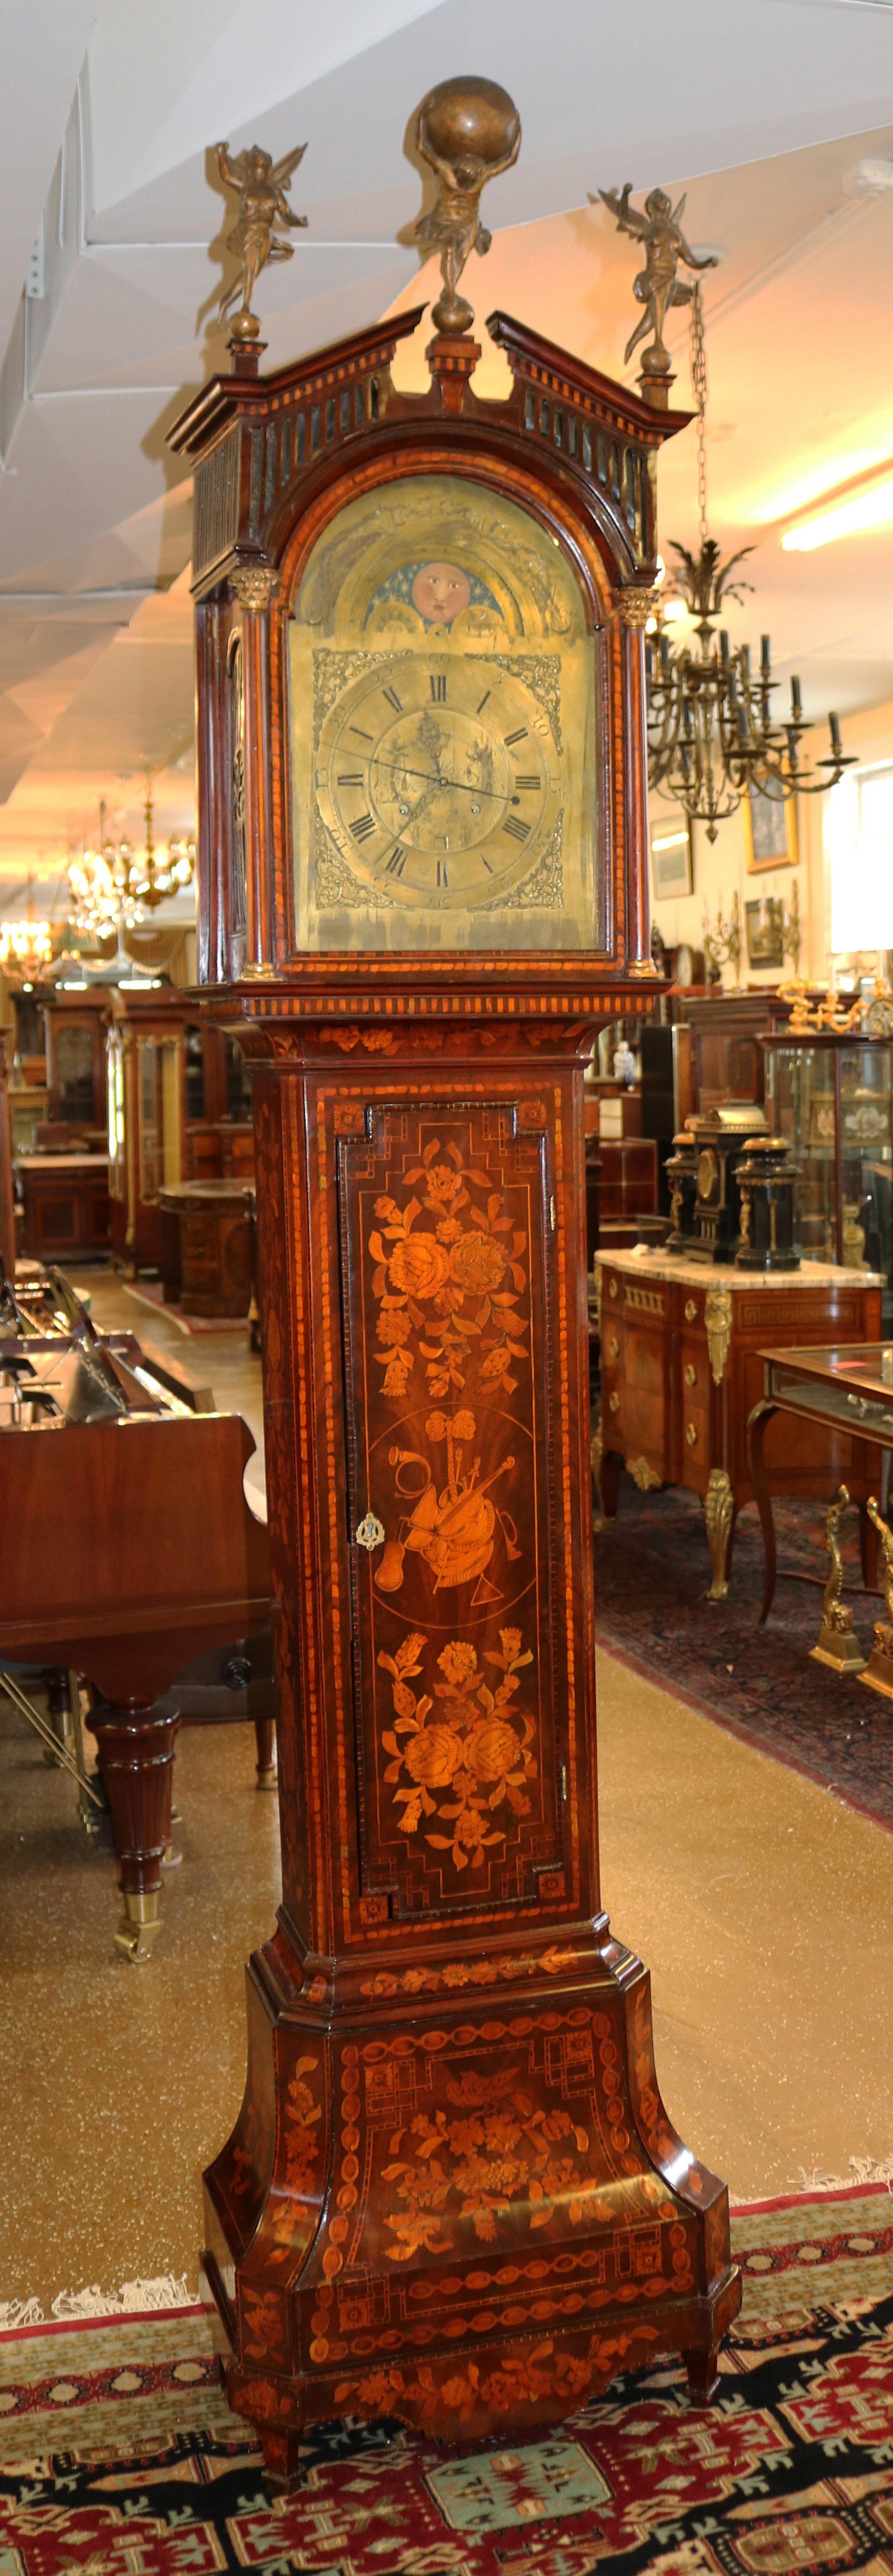 This stunning tall case clock was made in the Netherlands in the late 18th century. The case is magnificently inlaid and the top of hood has two angels on each side with a carving of atlas in the middle. The movement is made of a thick brass and is